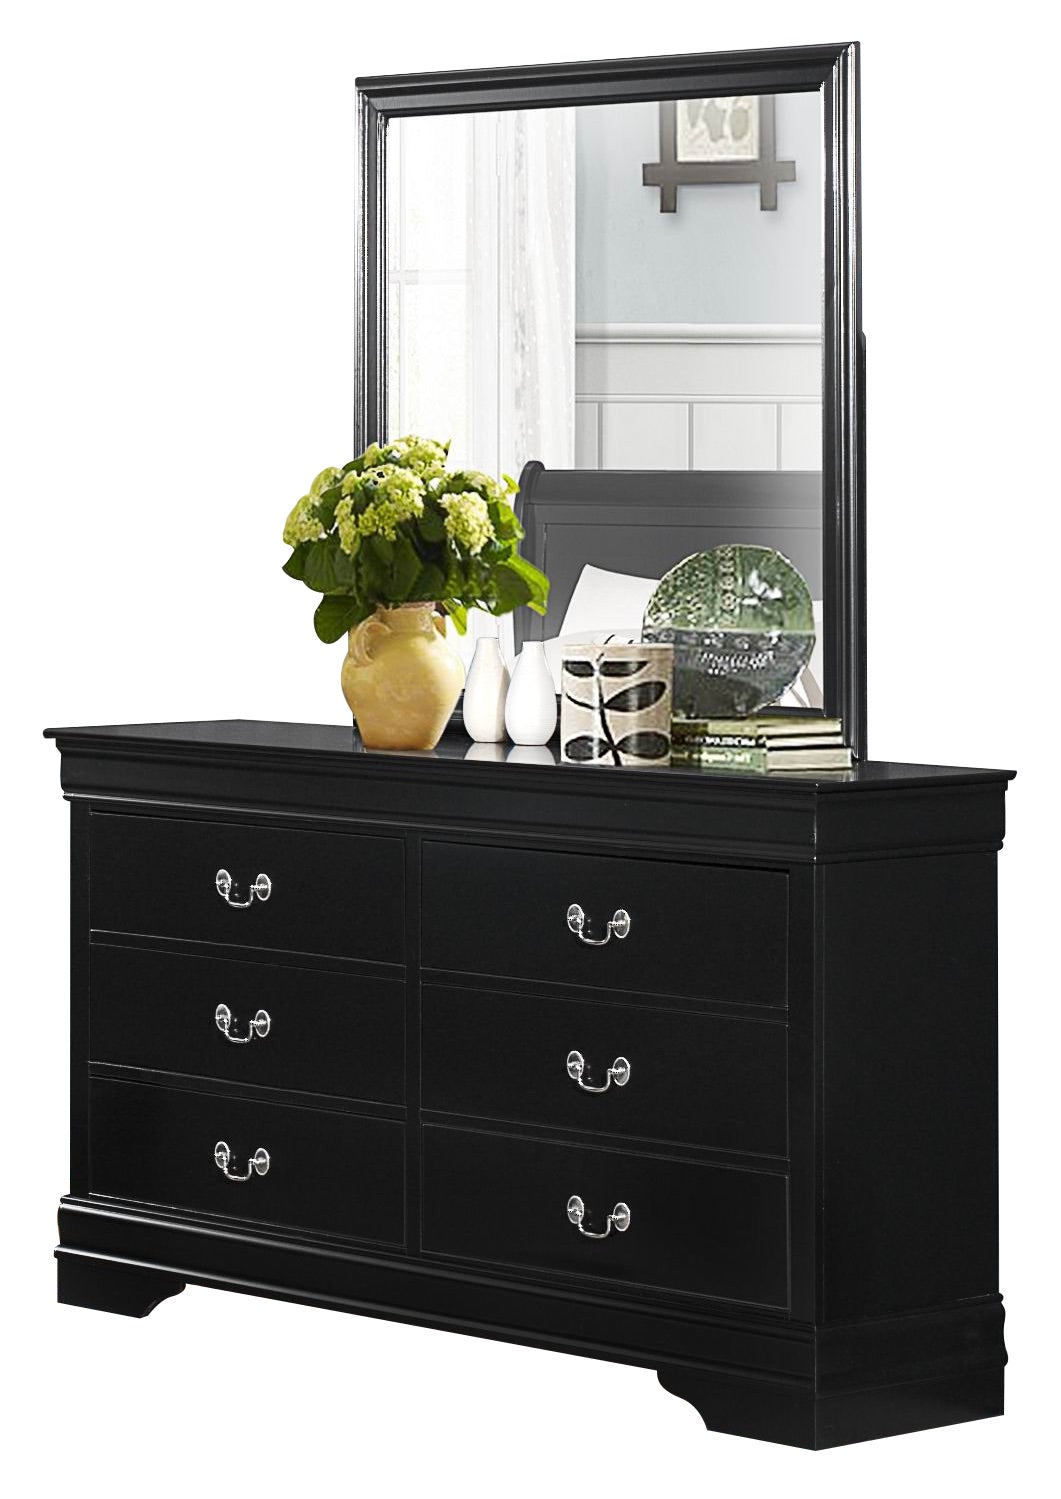 Manburg Louis Philippe 4PC Bedroom Set E King Sleigh Bed Dresser Mirror One Nightstand in Burnished Black